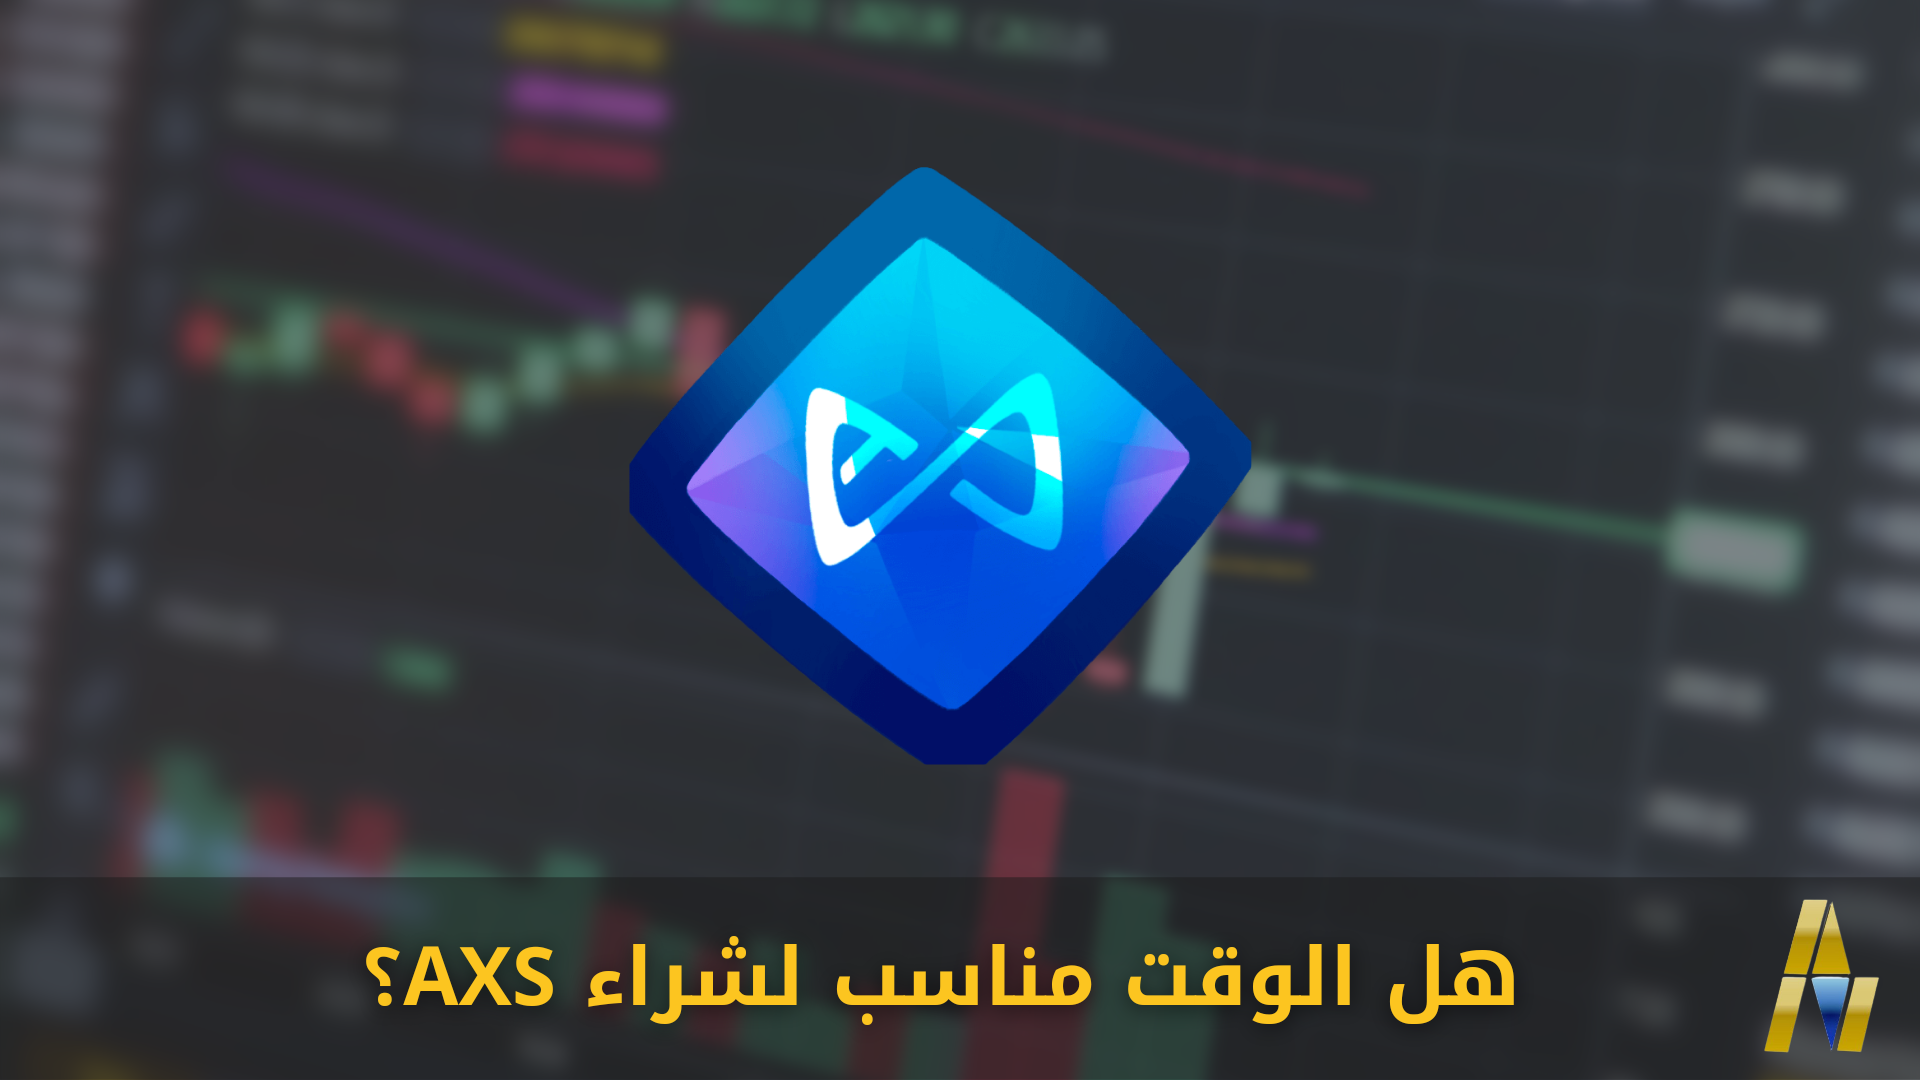 axie infinity price up by 35 27 time to buy axs coin